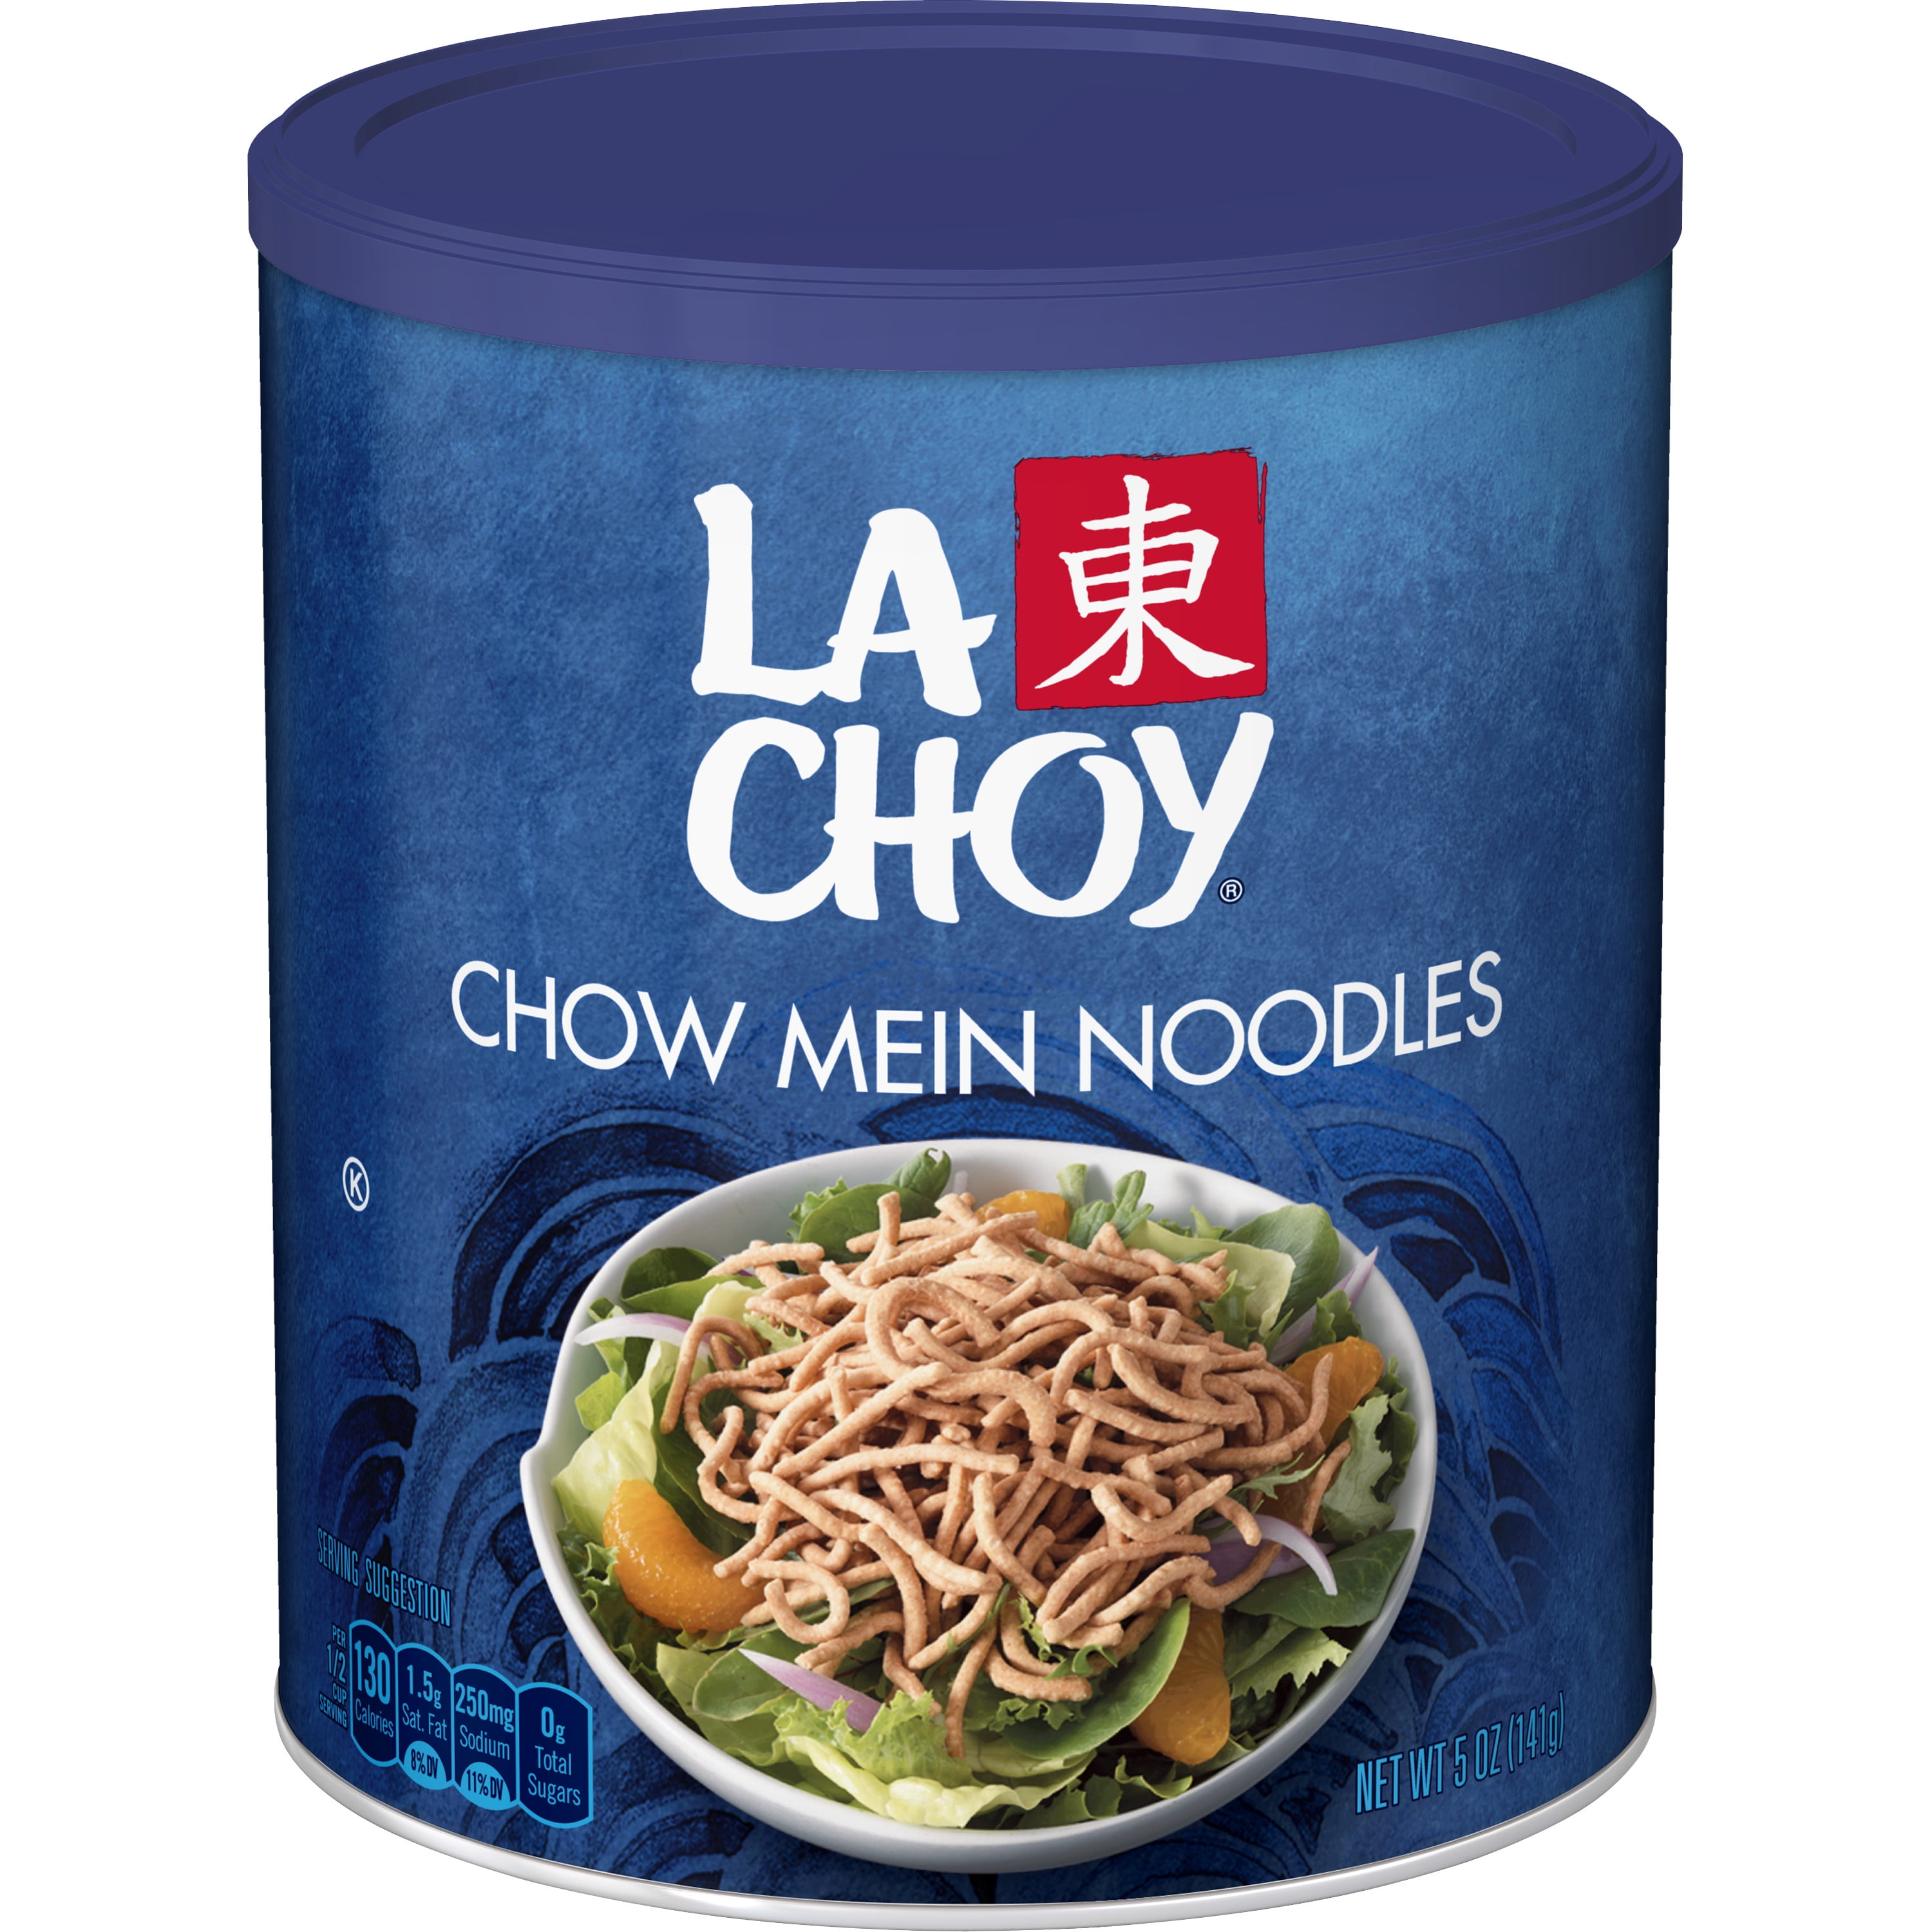 La Choy Chow Mein Noodles, Made from Wheat Flour, 5 oz Can